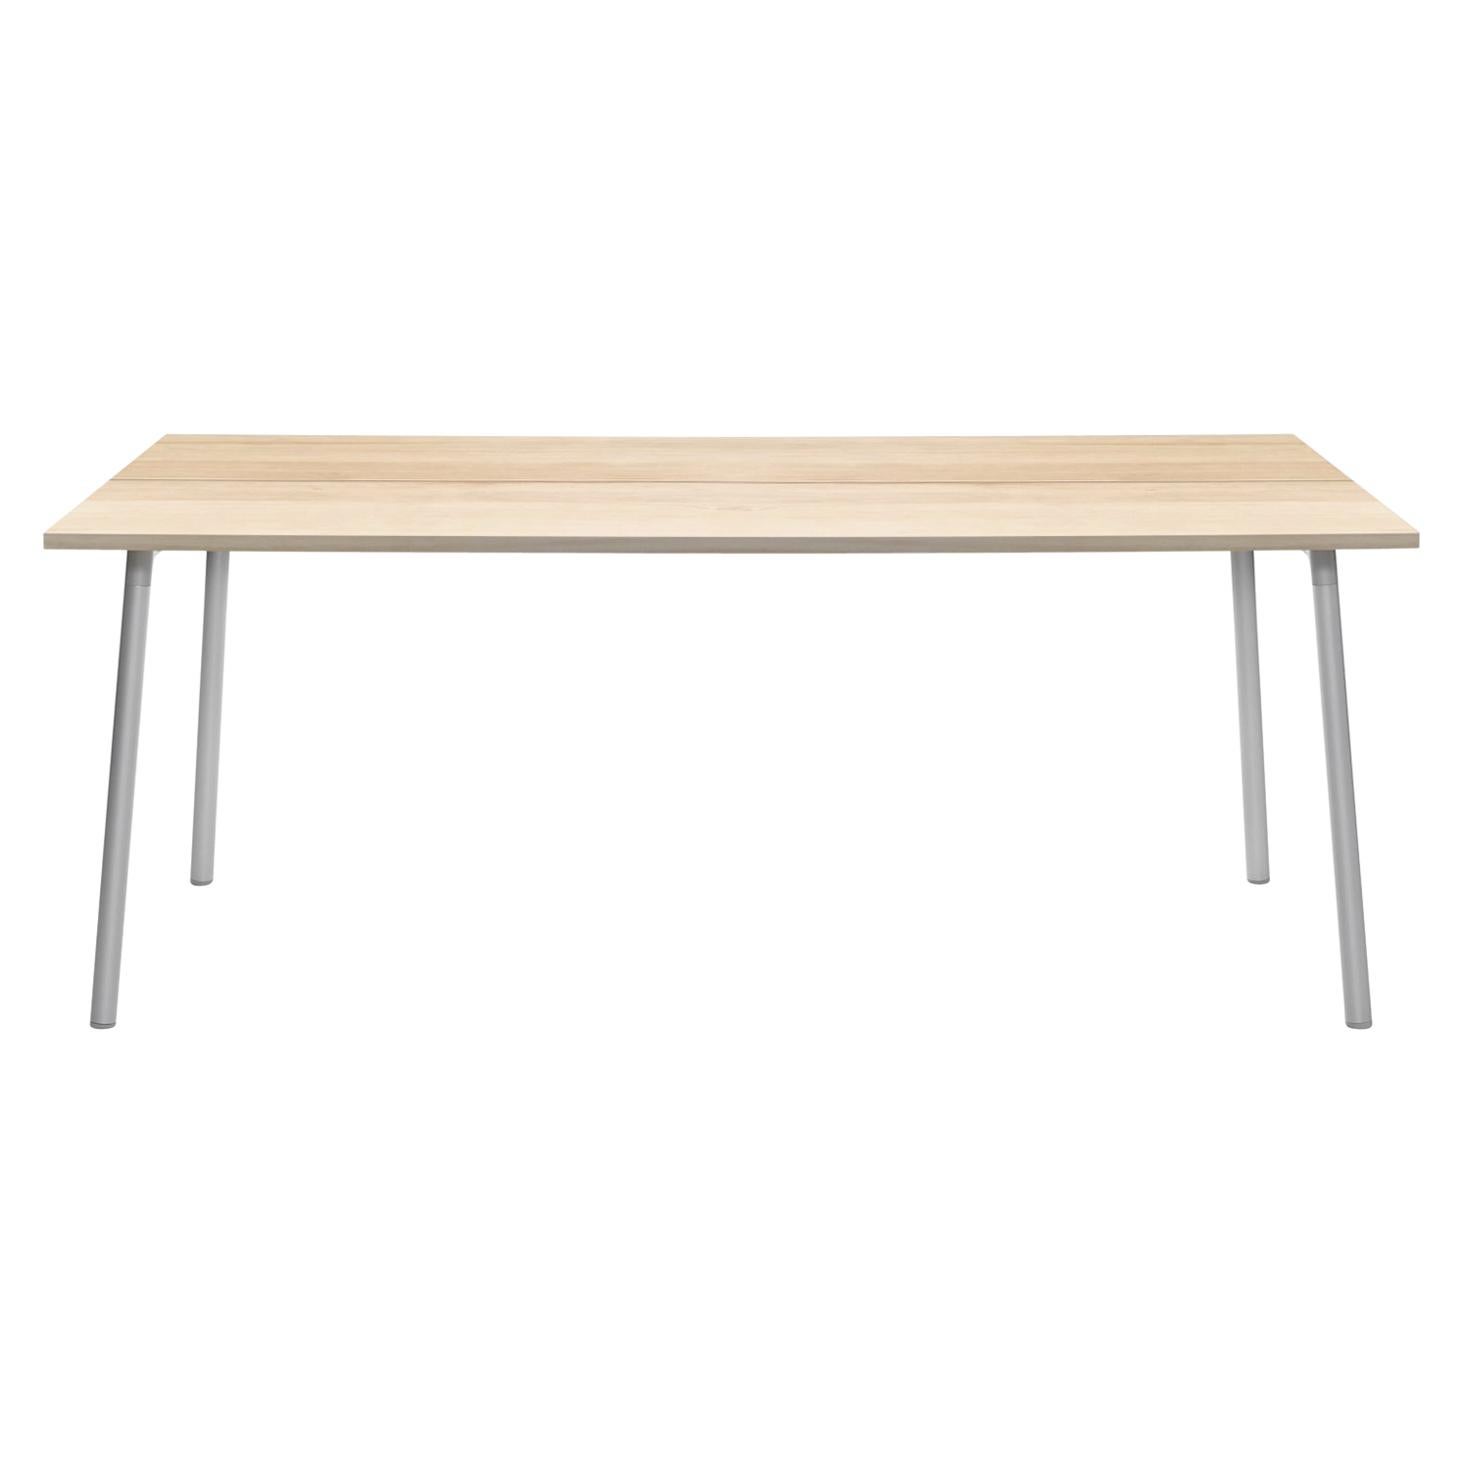 Emeco Run 72" Table with Aluminum Frame & Wood Top by Sam Hecht and Kim Colin